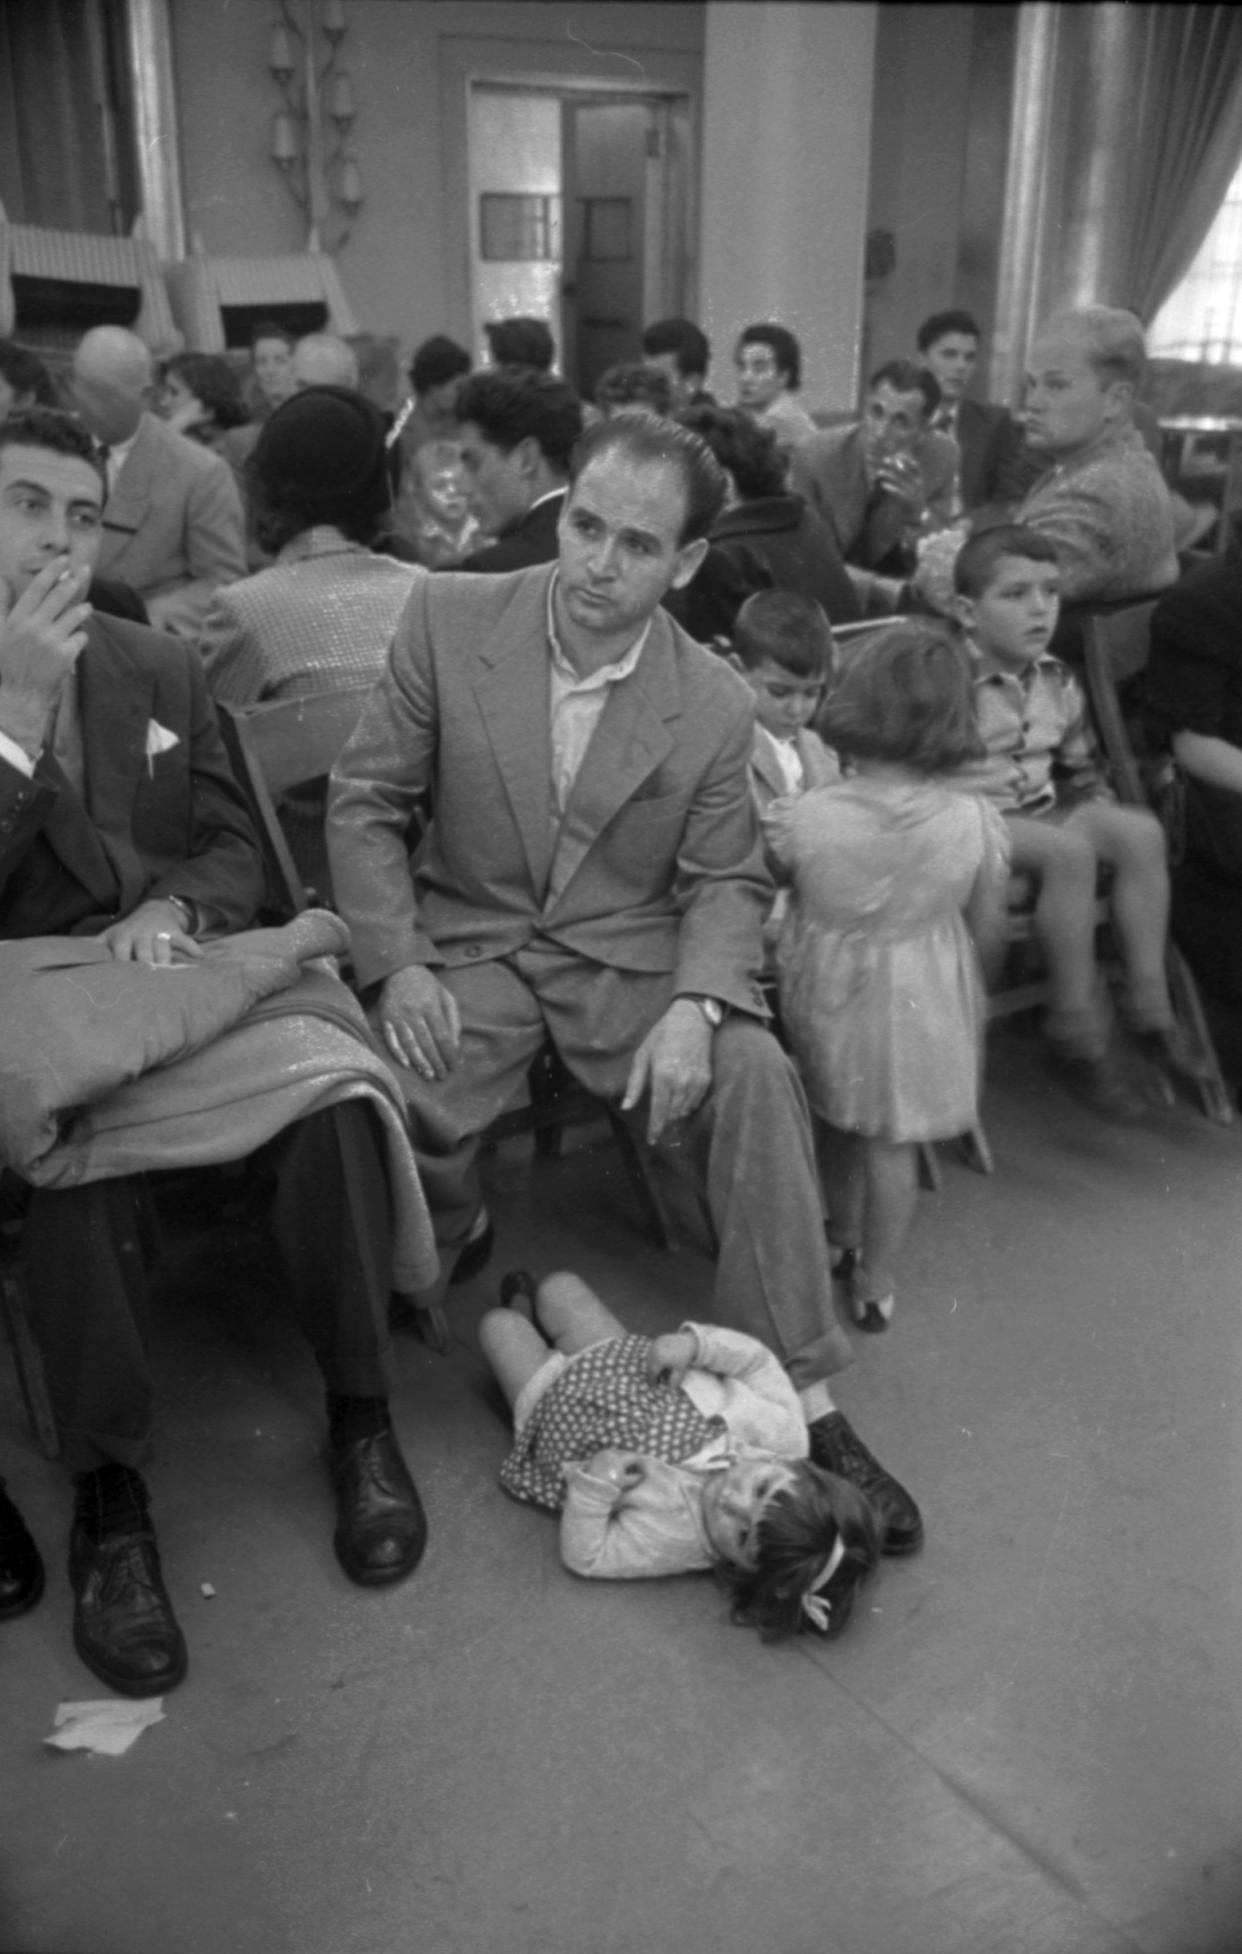 Raffaele Greco and his children on the Saturnia, waiting to go to the Ellis Island Immigration Station in New York, N.Y., in October of 1950.